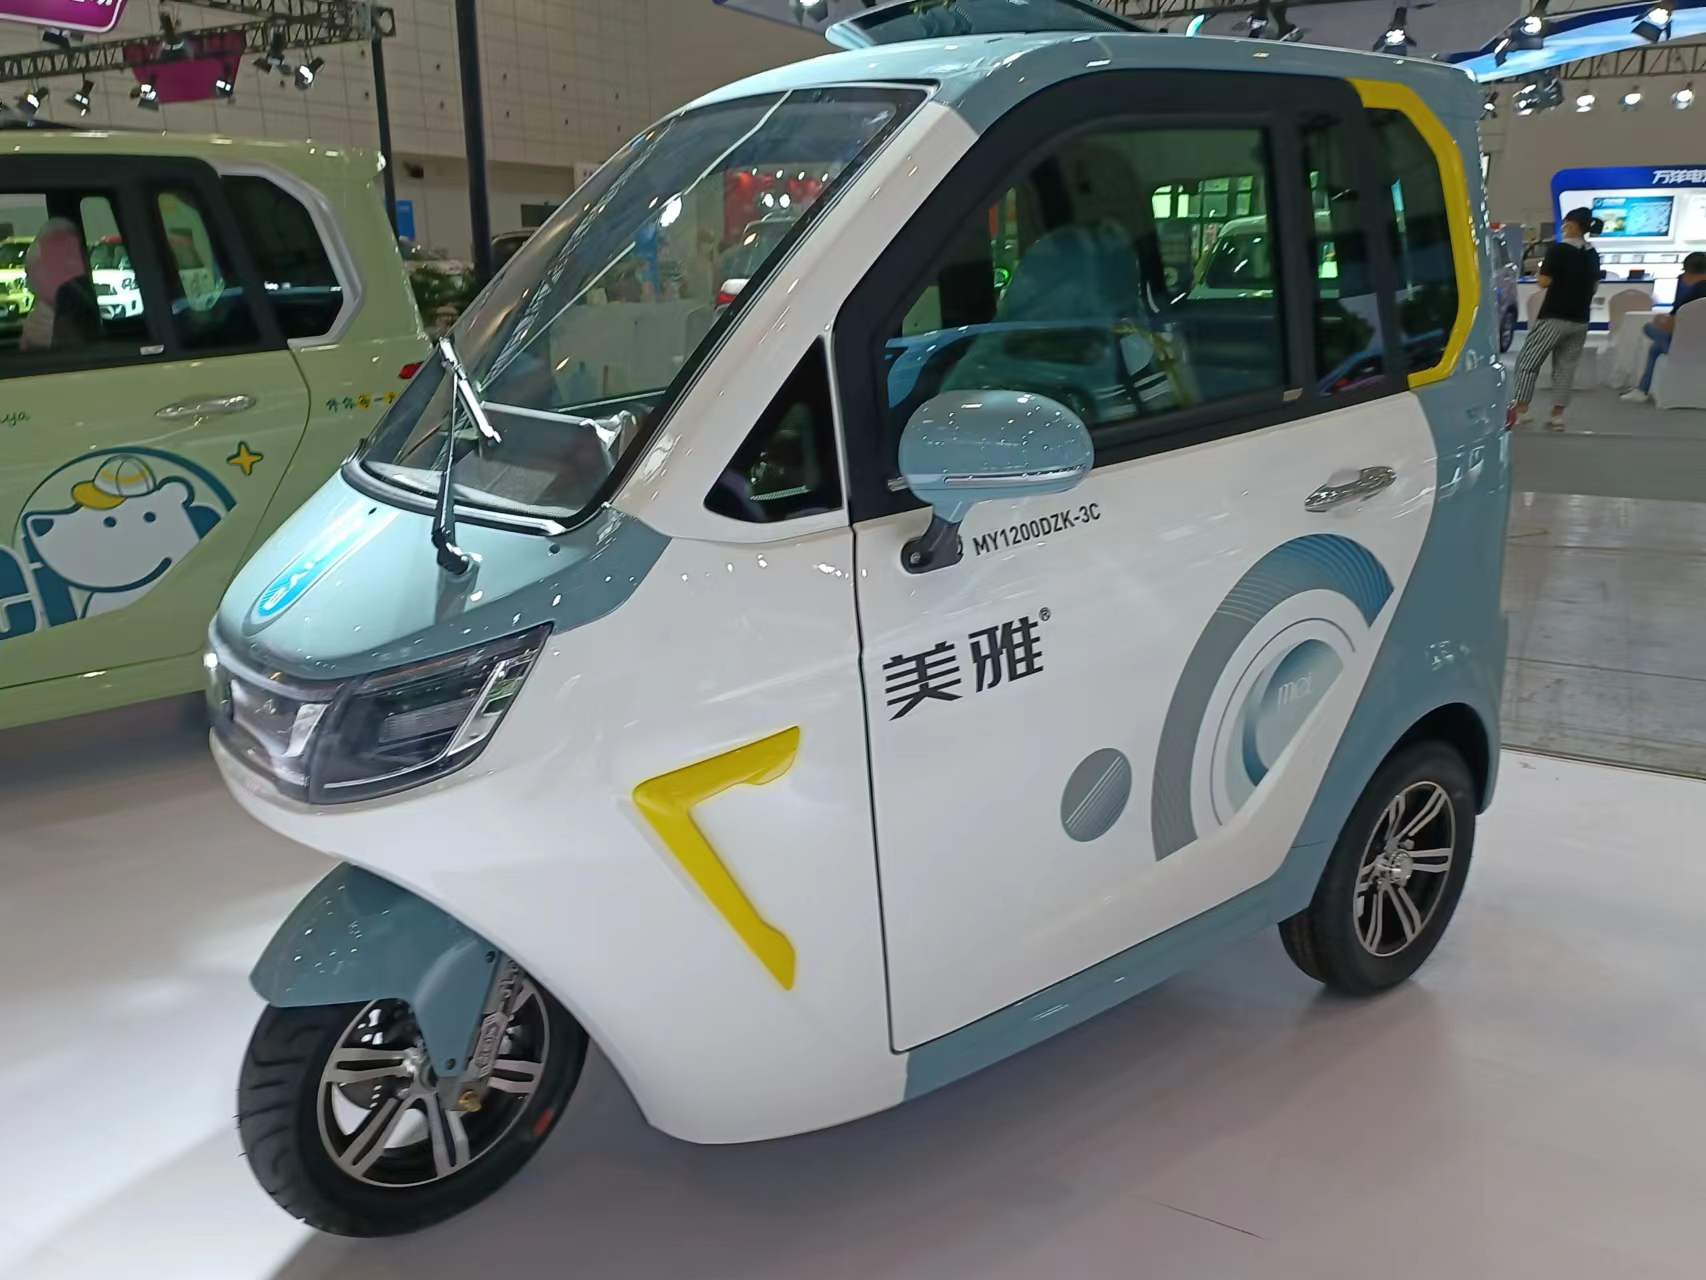 The new three-wheel fully enclosed electric vehicle carries three people